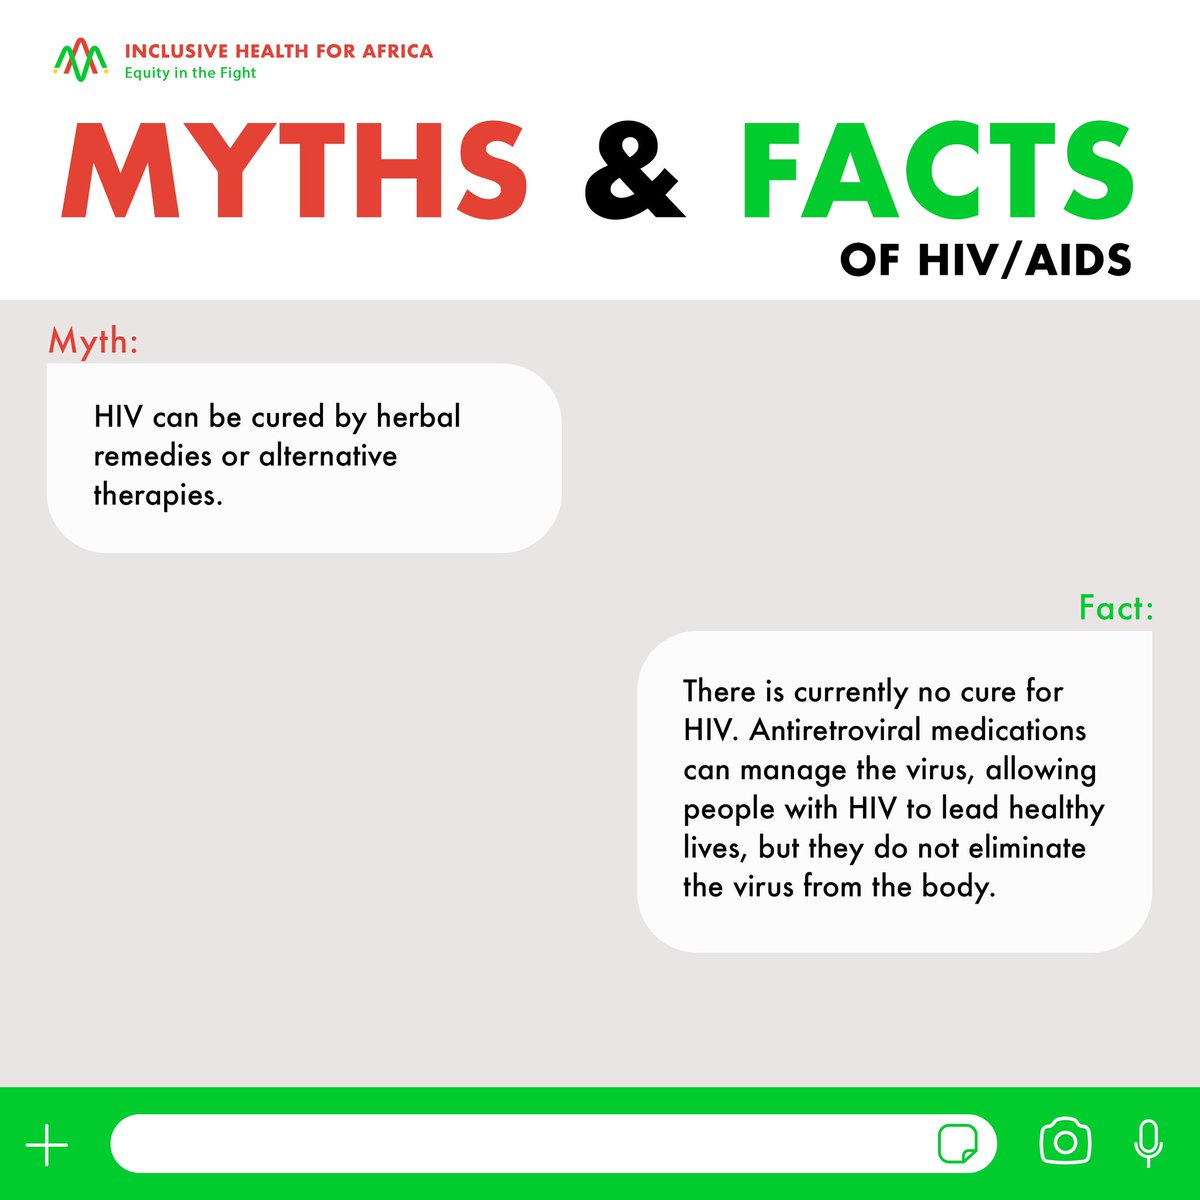 Antiretroviral medications have proven to be very effective in reducing the viral load allowing persons with HIV to live healthy lives.

#InclusiveHealthAfrica #IHA #SRHRForAll #LeaveNoOneBehind
#HealthForEveryVoice #AccessToSRHR #srhrAfrica #HIV #AIDS